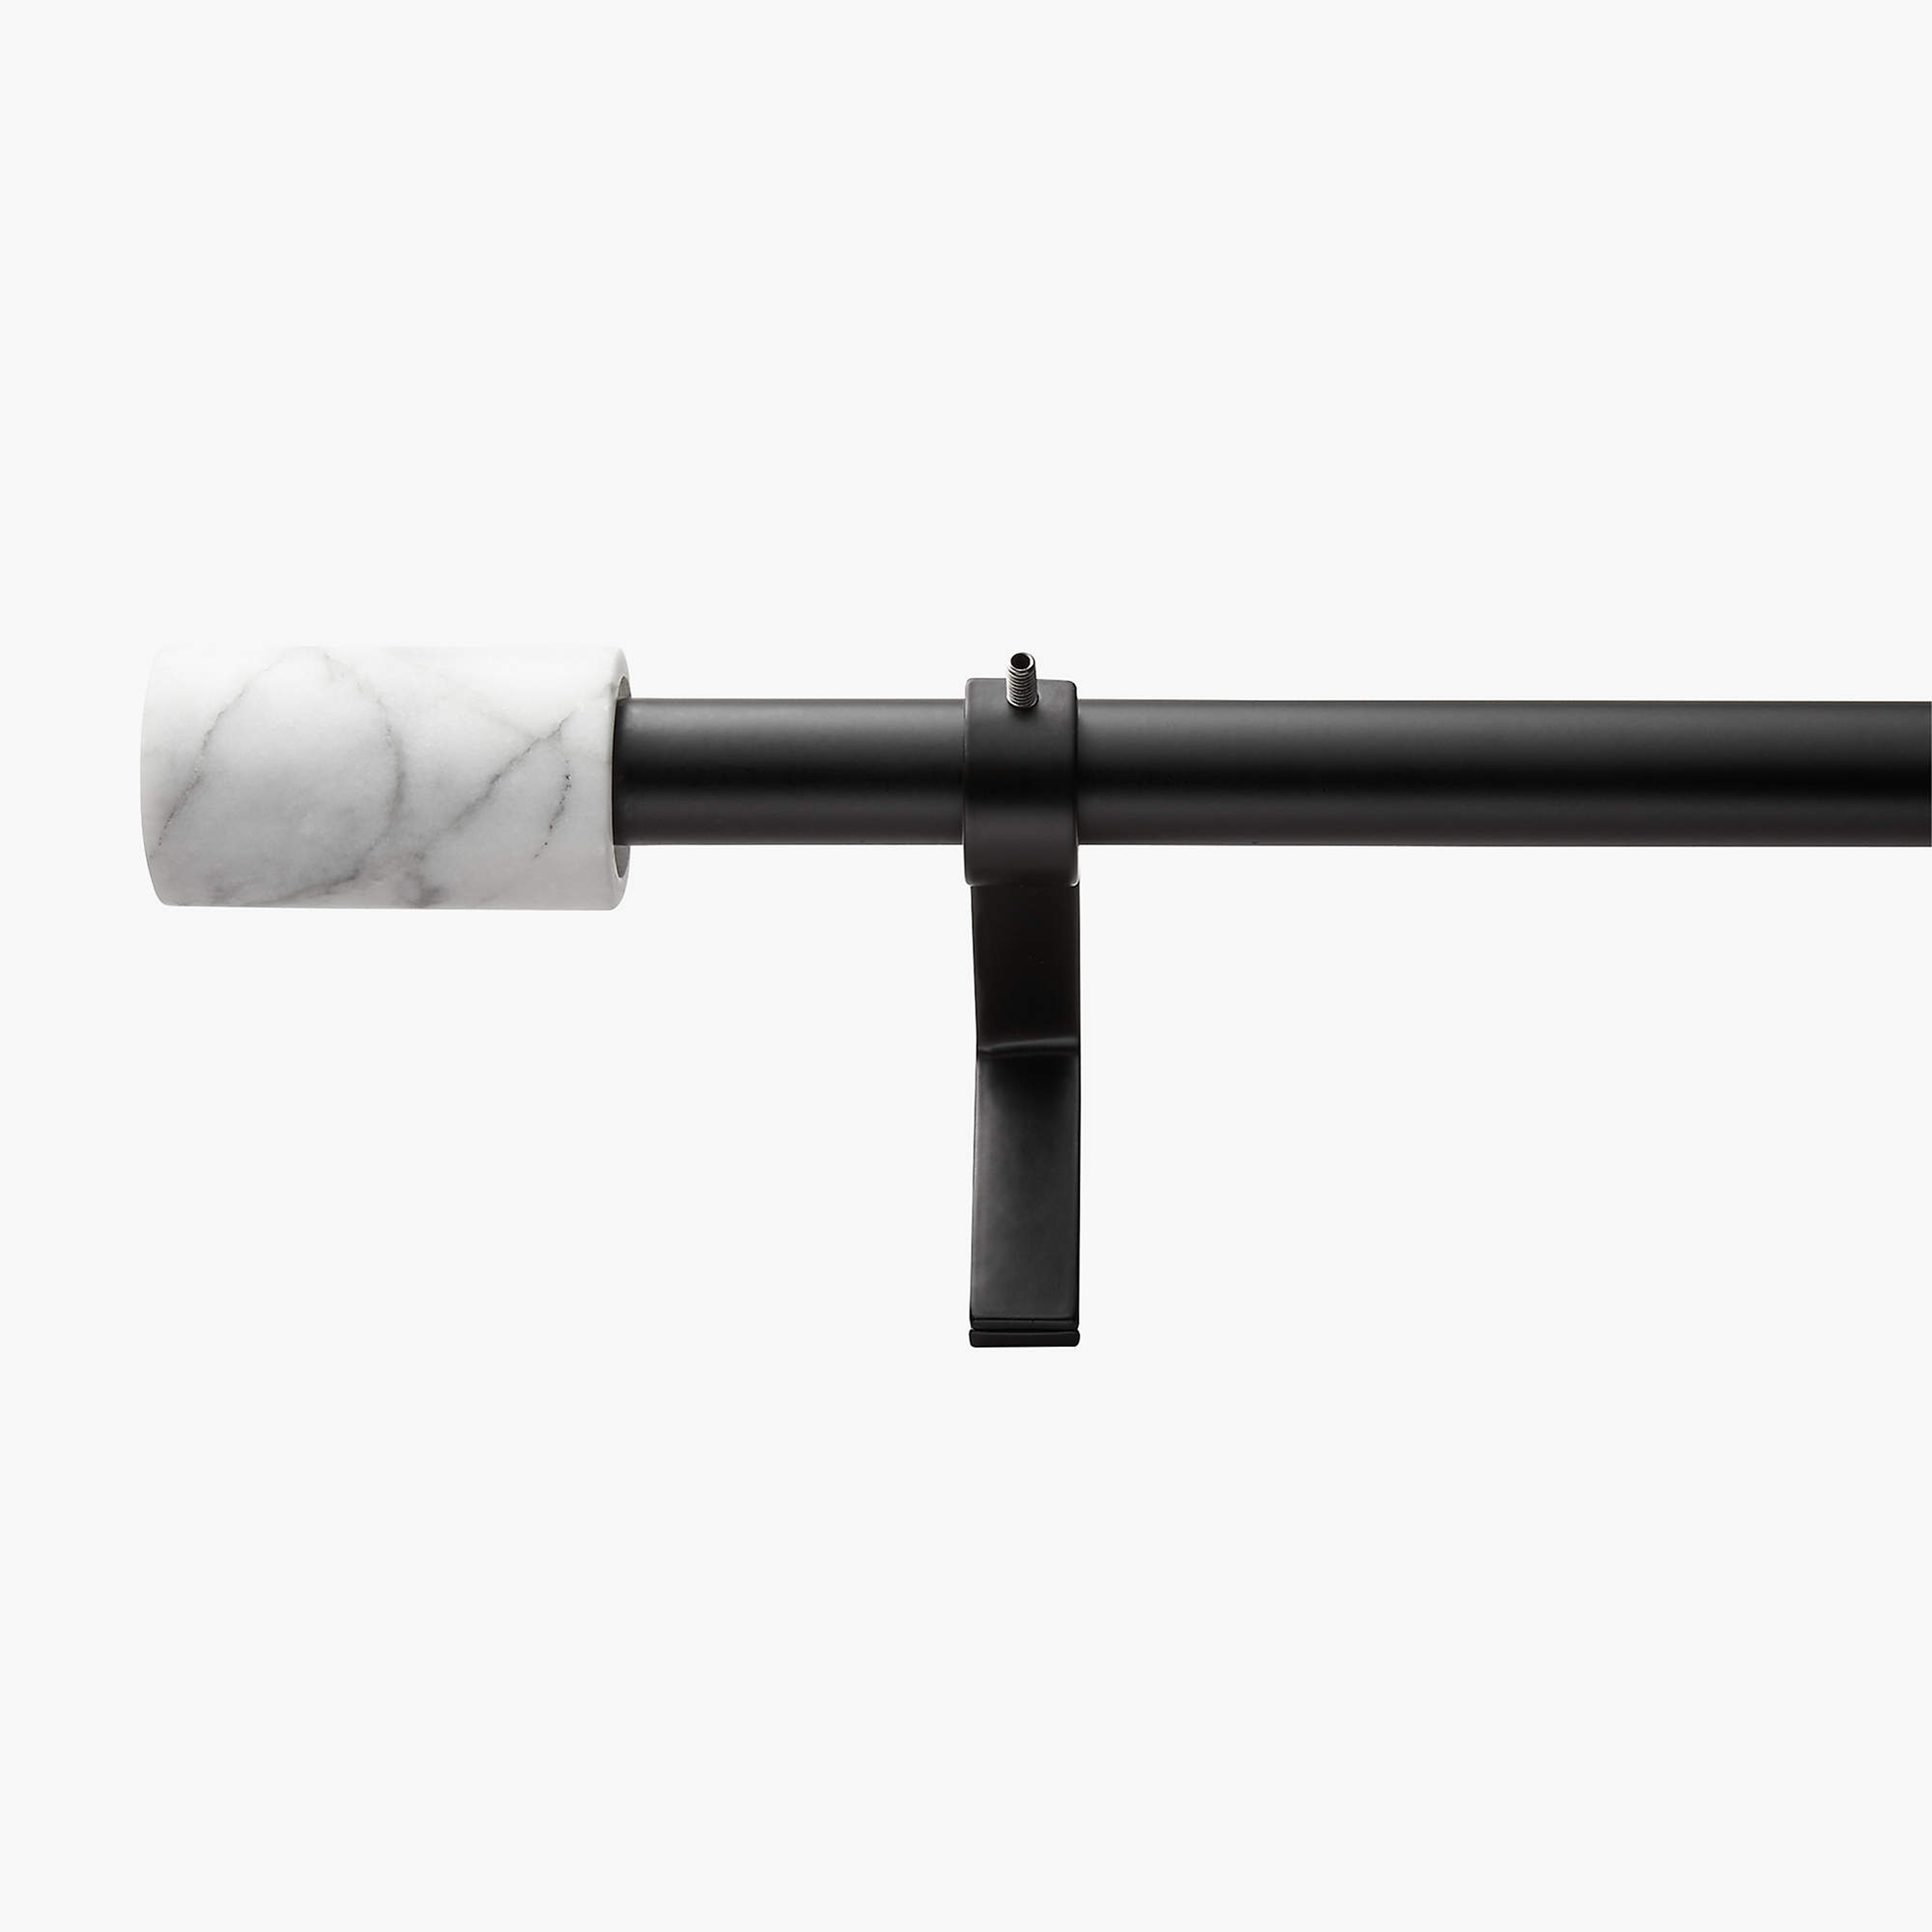 MATTE BLACK WITH WHITE MARBLE FINIAL CURTAIN ROD SET 28"-48"X.75"DIA. - CB2